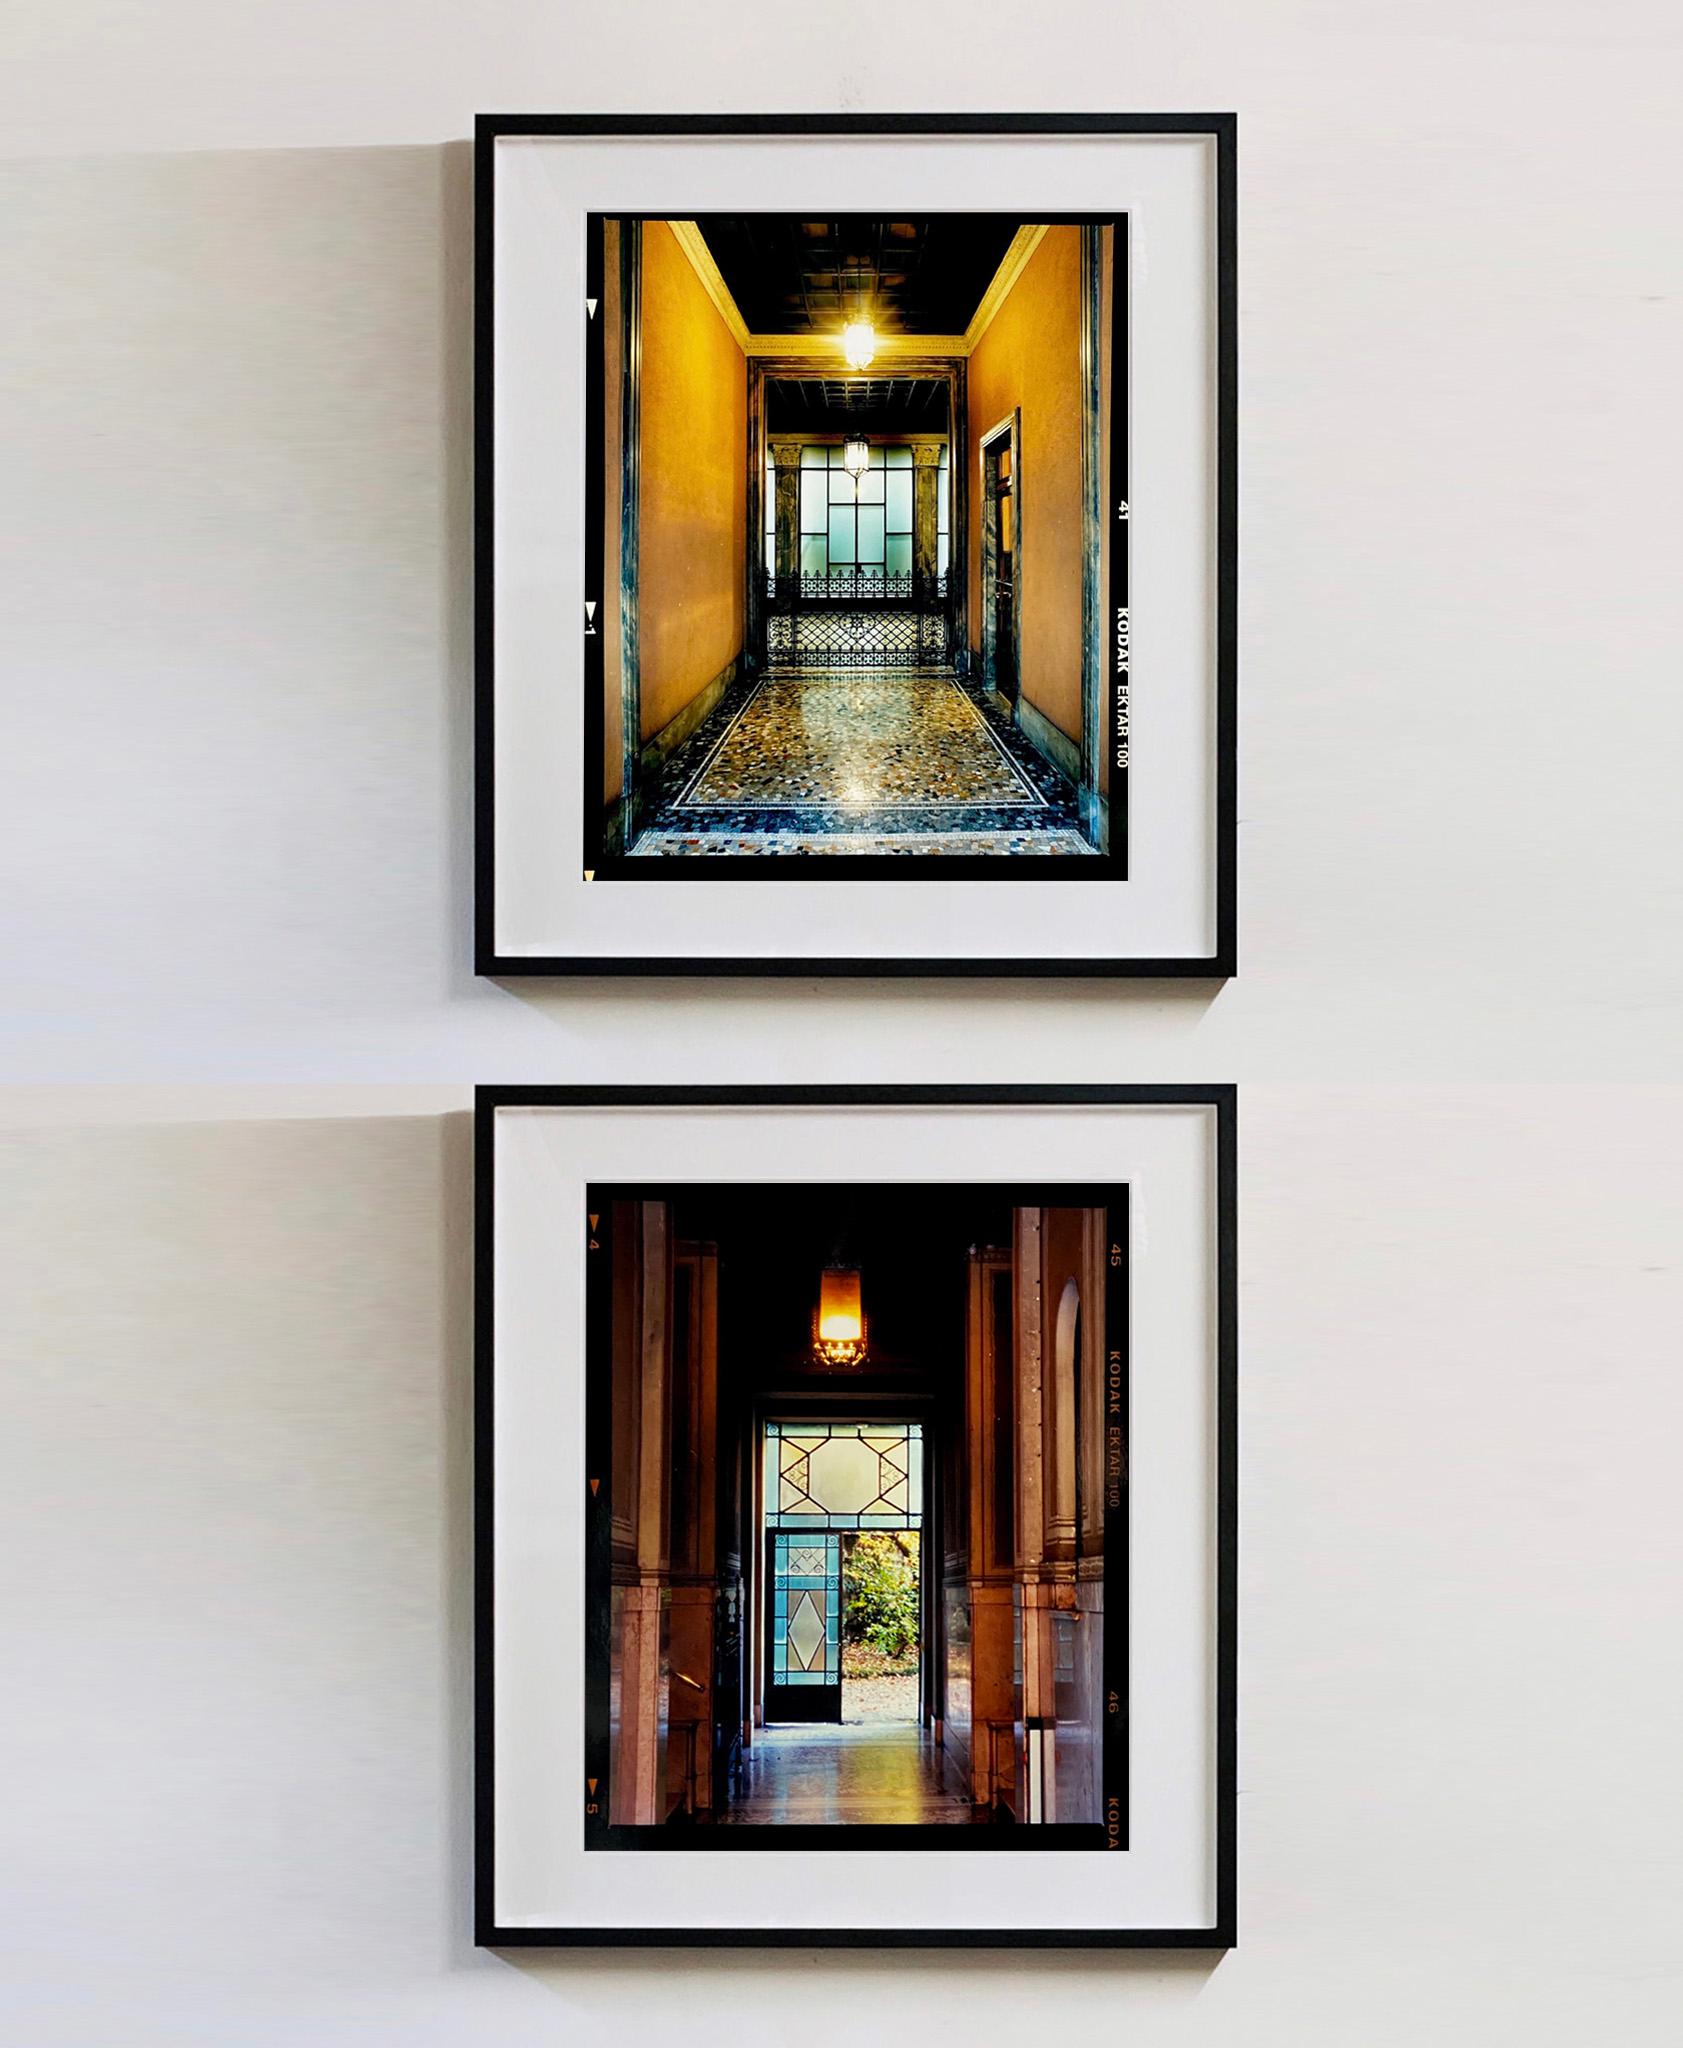 Foyer III, from Richard Heeps series A Short History of Milan which began as a special project for the 2018 Affordable Art Fair Milan. It was well received and the artwork has become popular with art buyers around the world. Richard continues to add